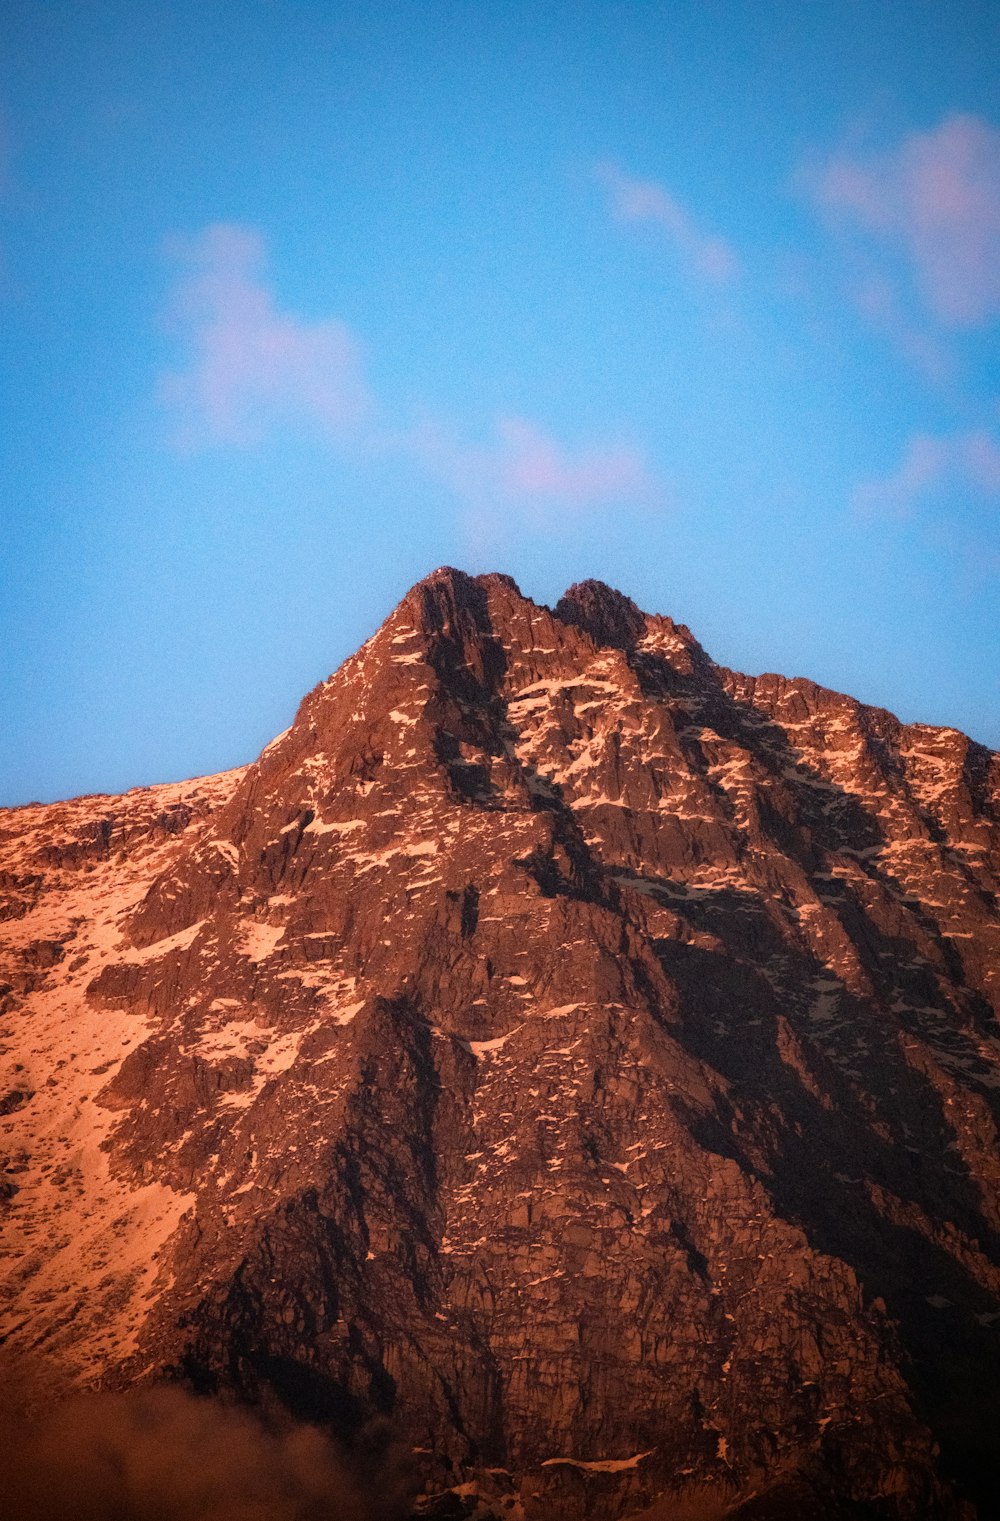 a very tall mountain with a blue sky in the background